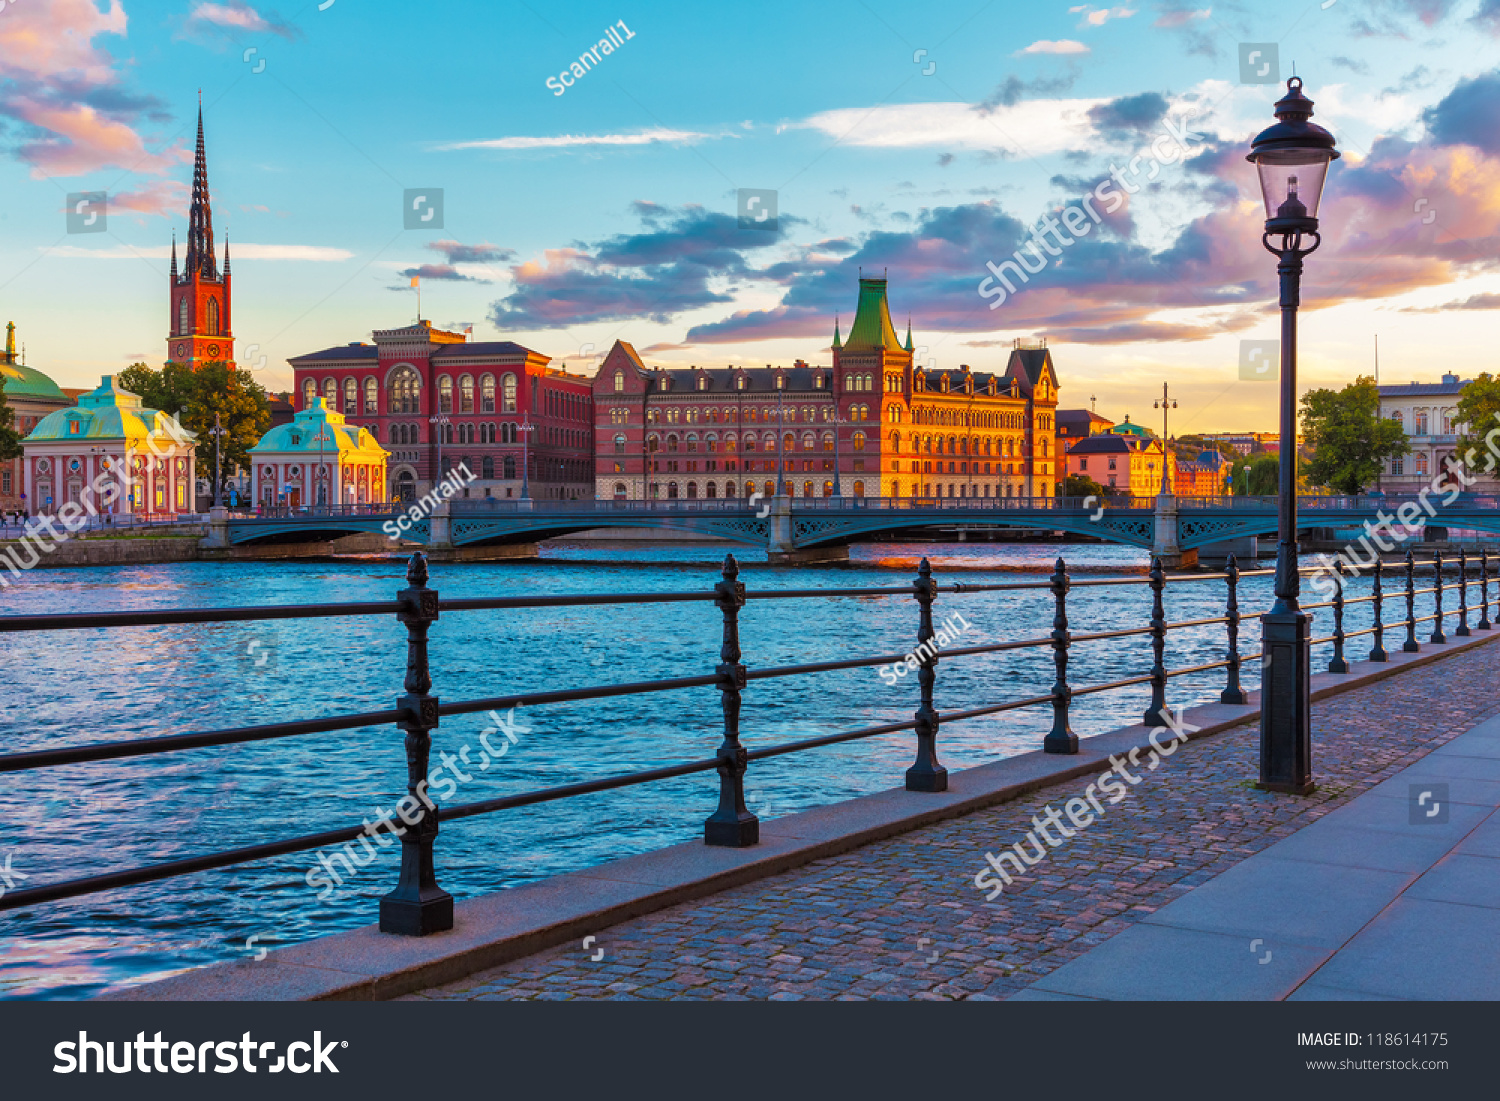 Scenic summer sunset in the Old Town (Gamla Stan) in Stockholm, Sweden #118614175